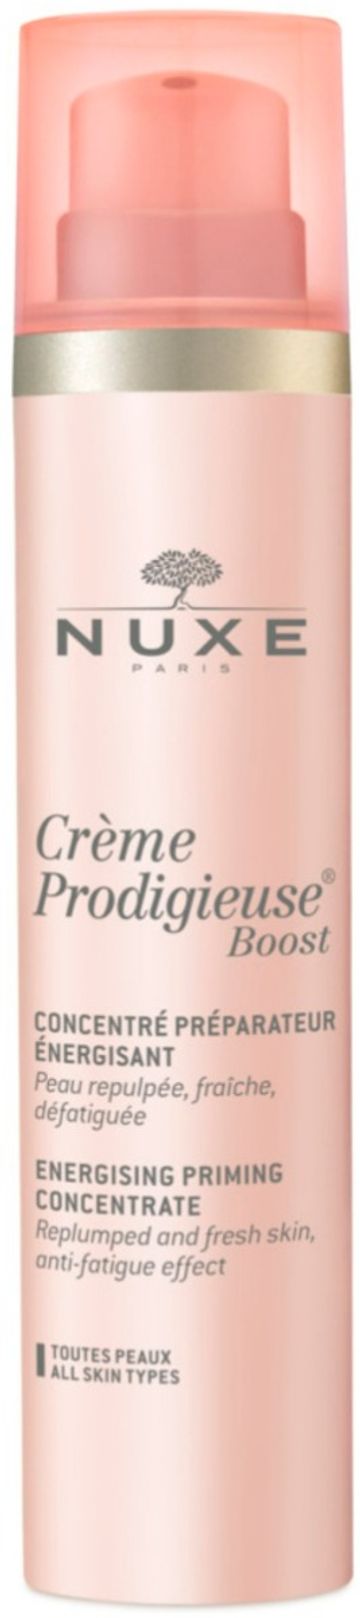 Nuxe Energising Priming Concentrate 